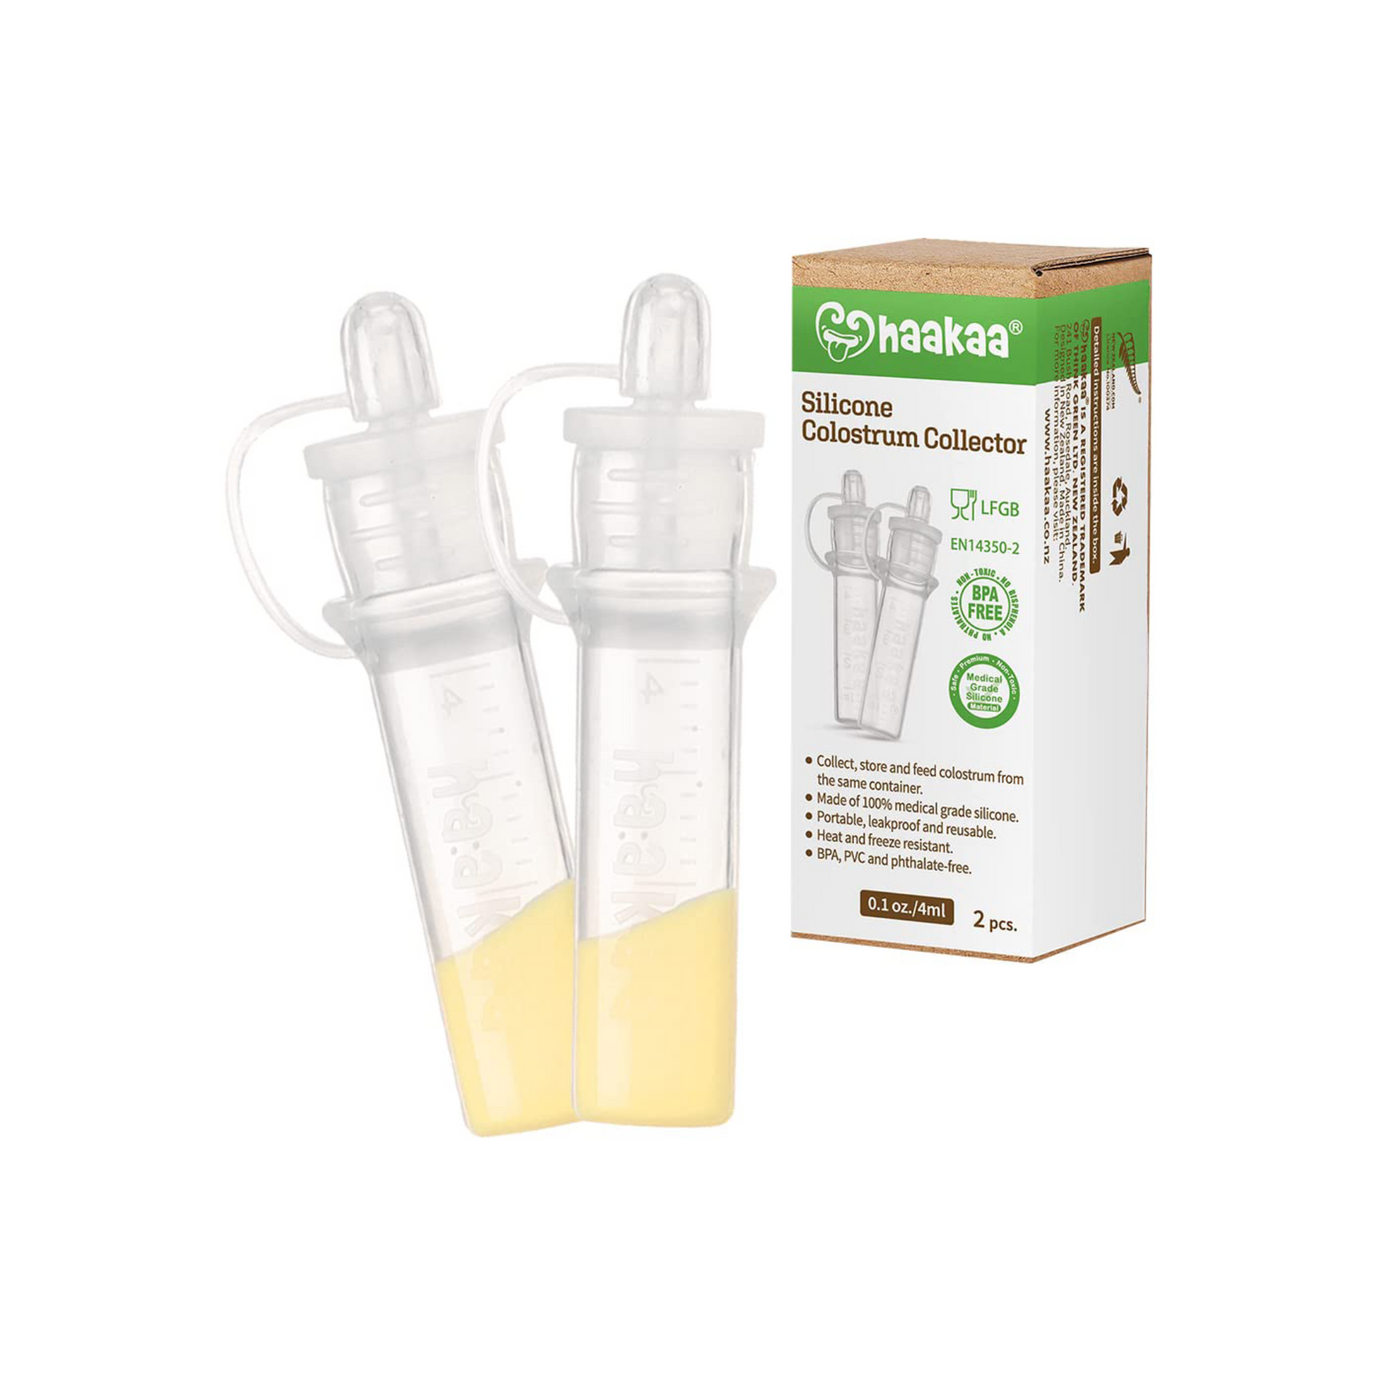 Did you know with the colostrum collector you can collect, store, free